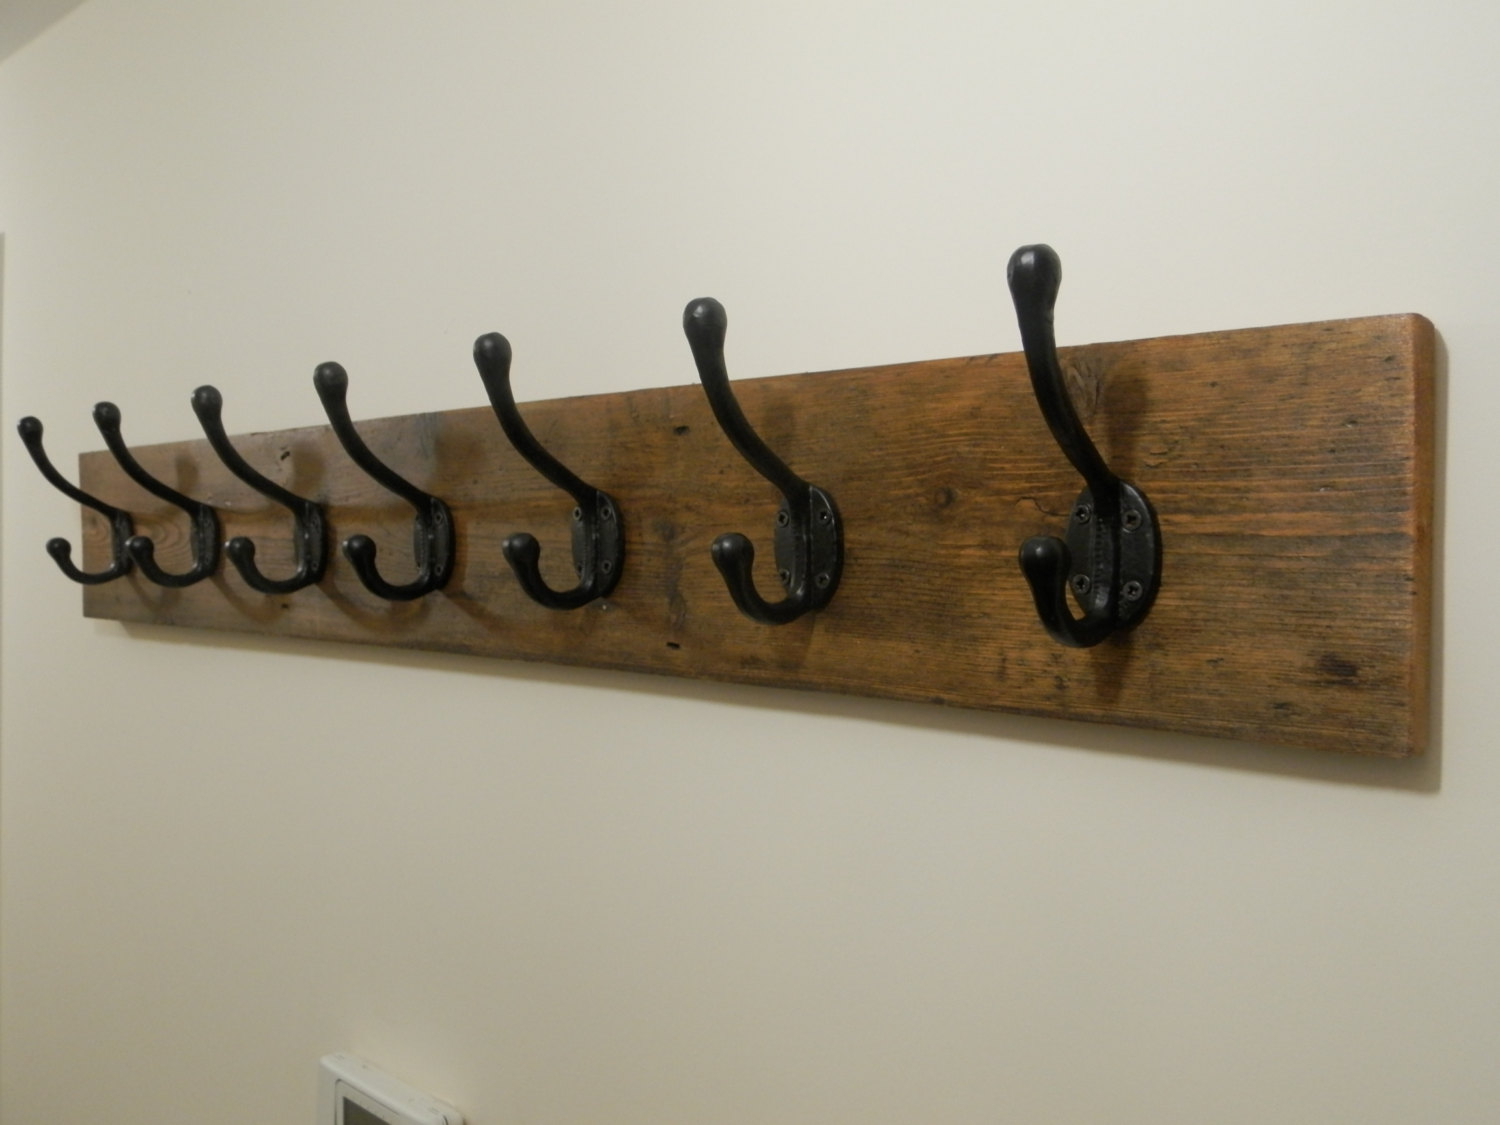 100cm Lengths \\ Made From Reclaimed Wood and Cast Iron \\ Wax Finish \\ Home \\ Anchor \\ Handmade Rustic Coat Rack \\ 30cm